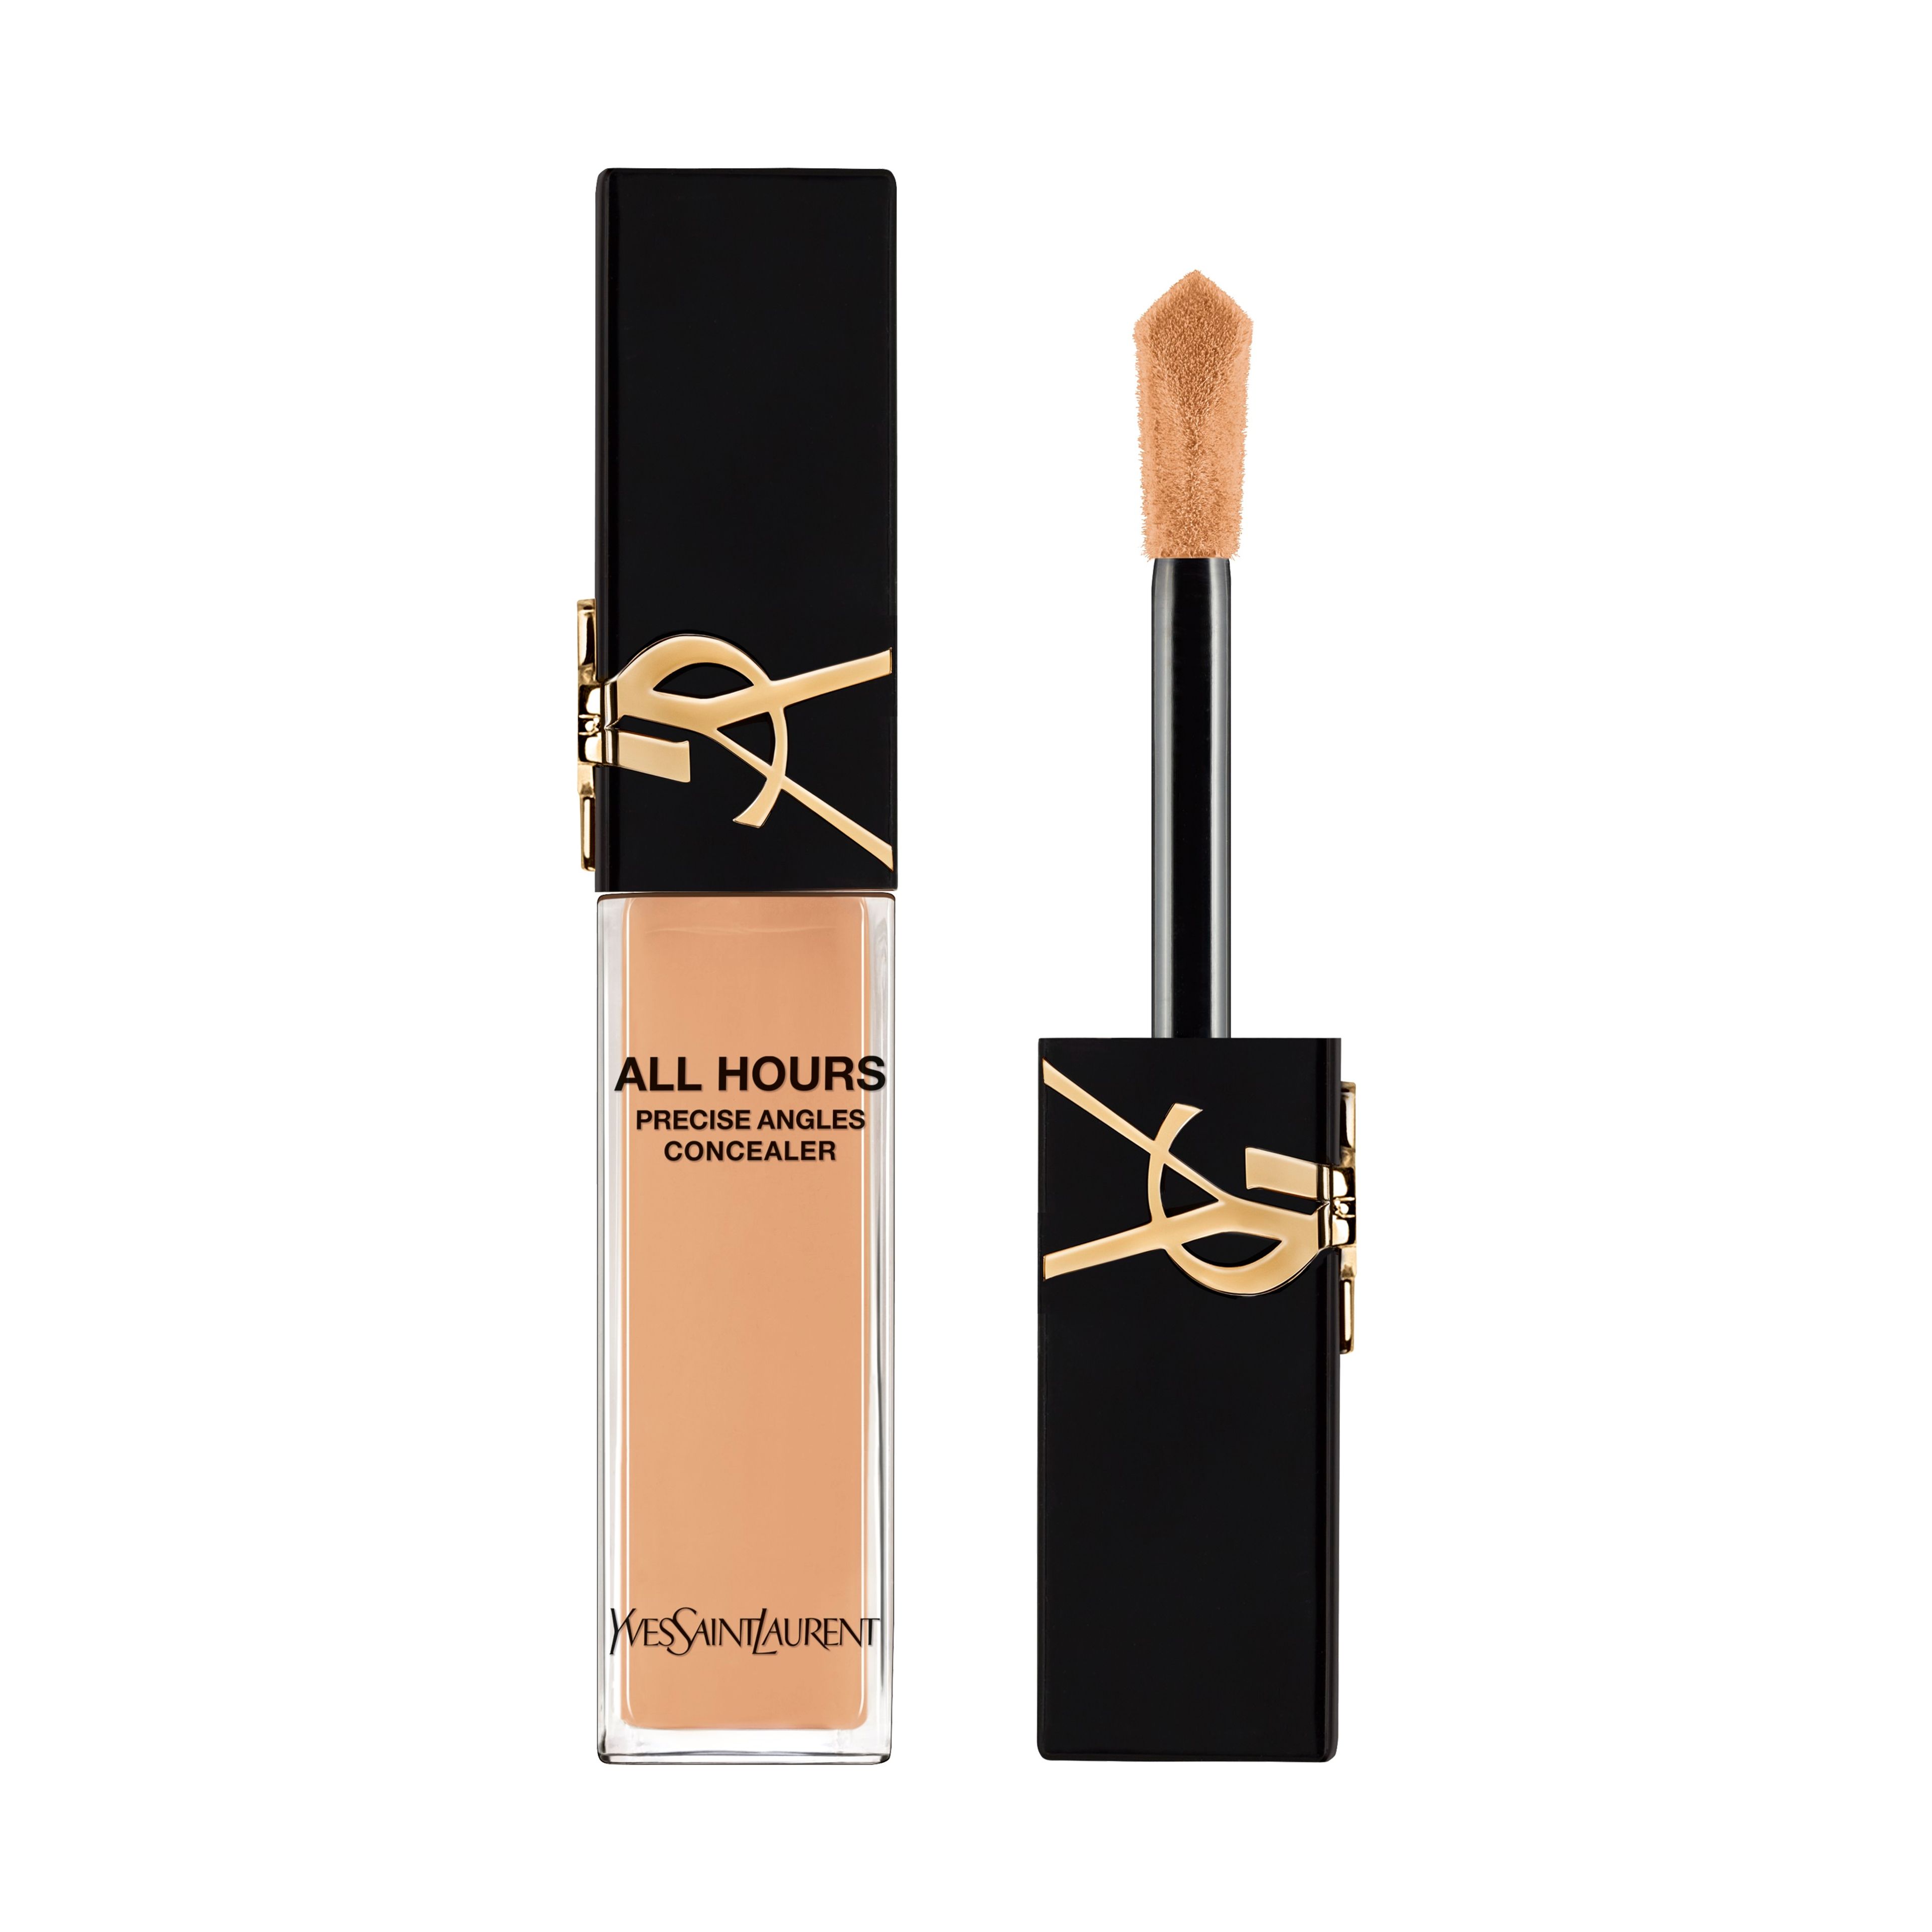 Yves Saint Laurent All Hours Precise Angles Concealer 1